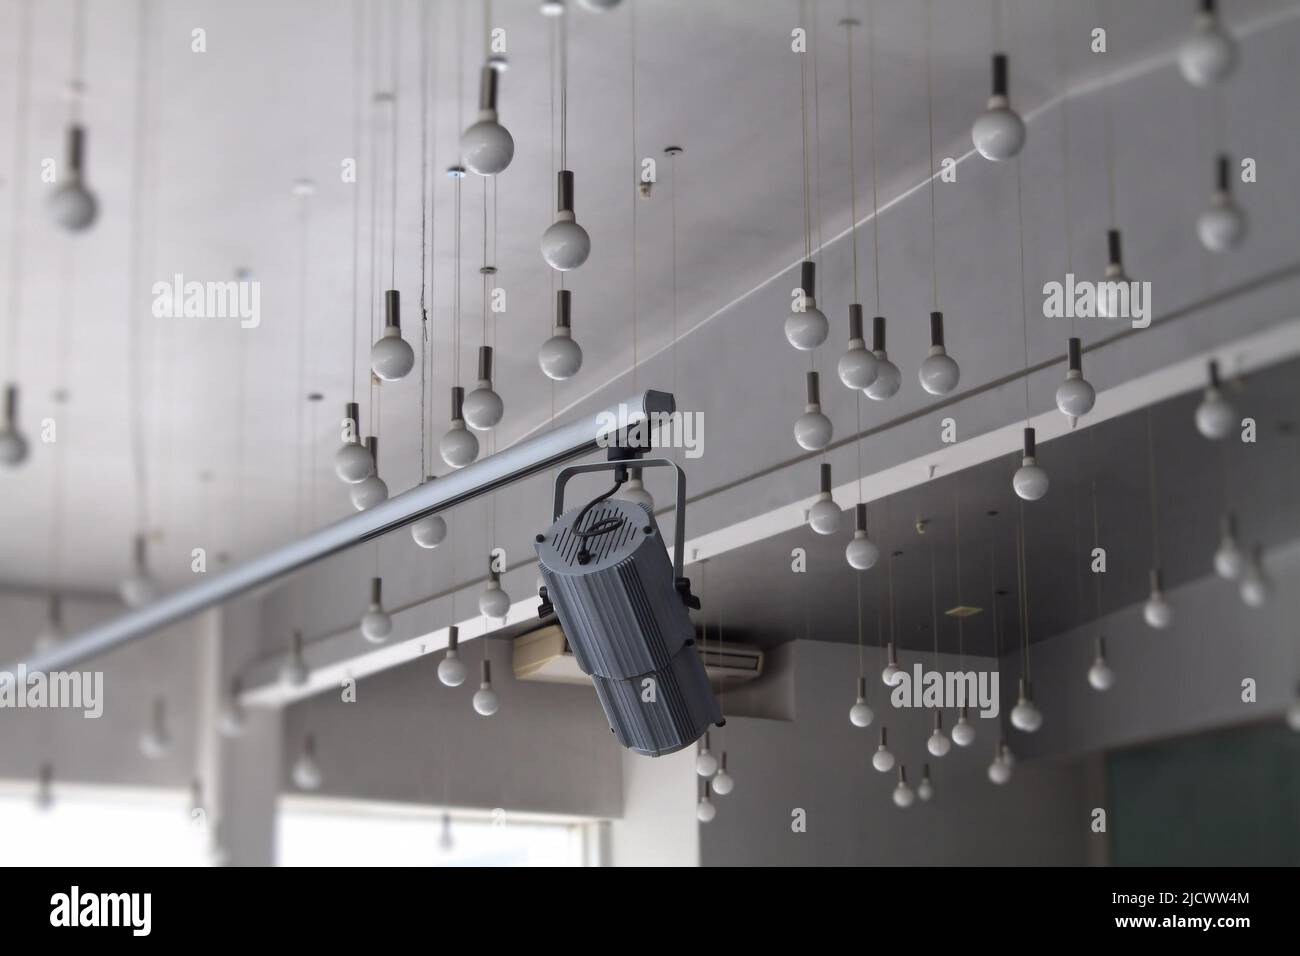 Studio lighting ceiling lamps and controlled track spotlight on rail system Stock Photo